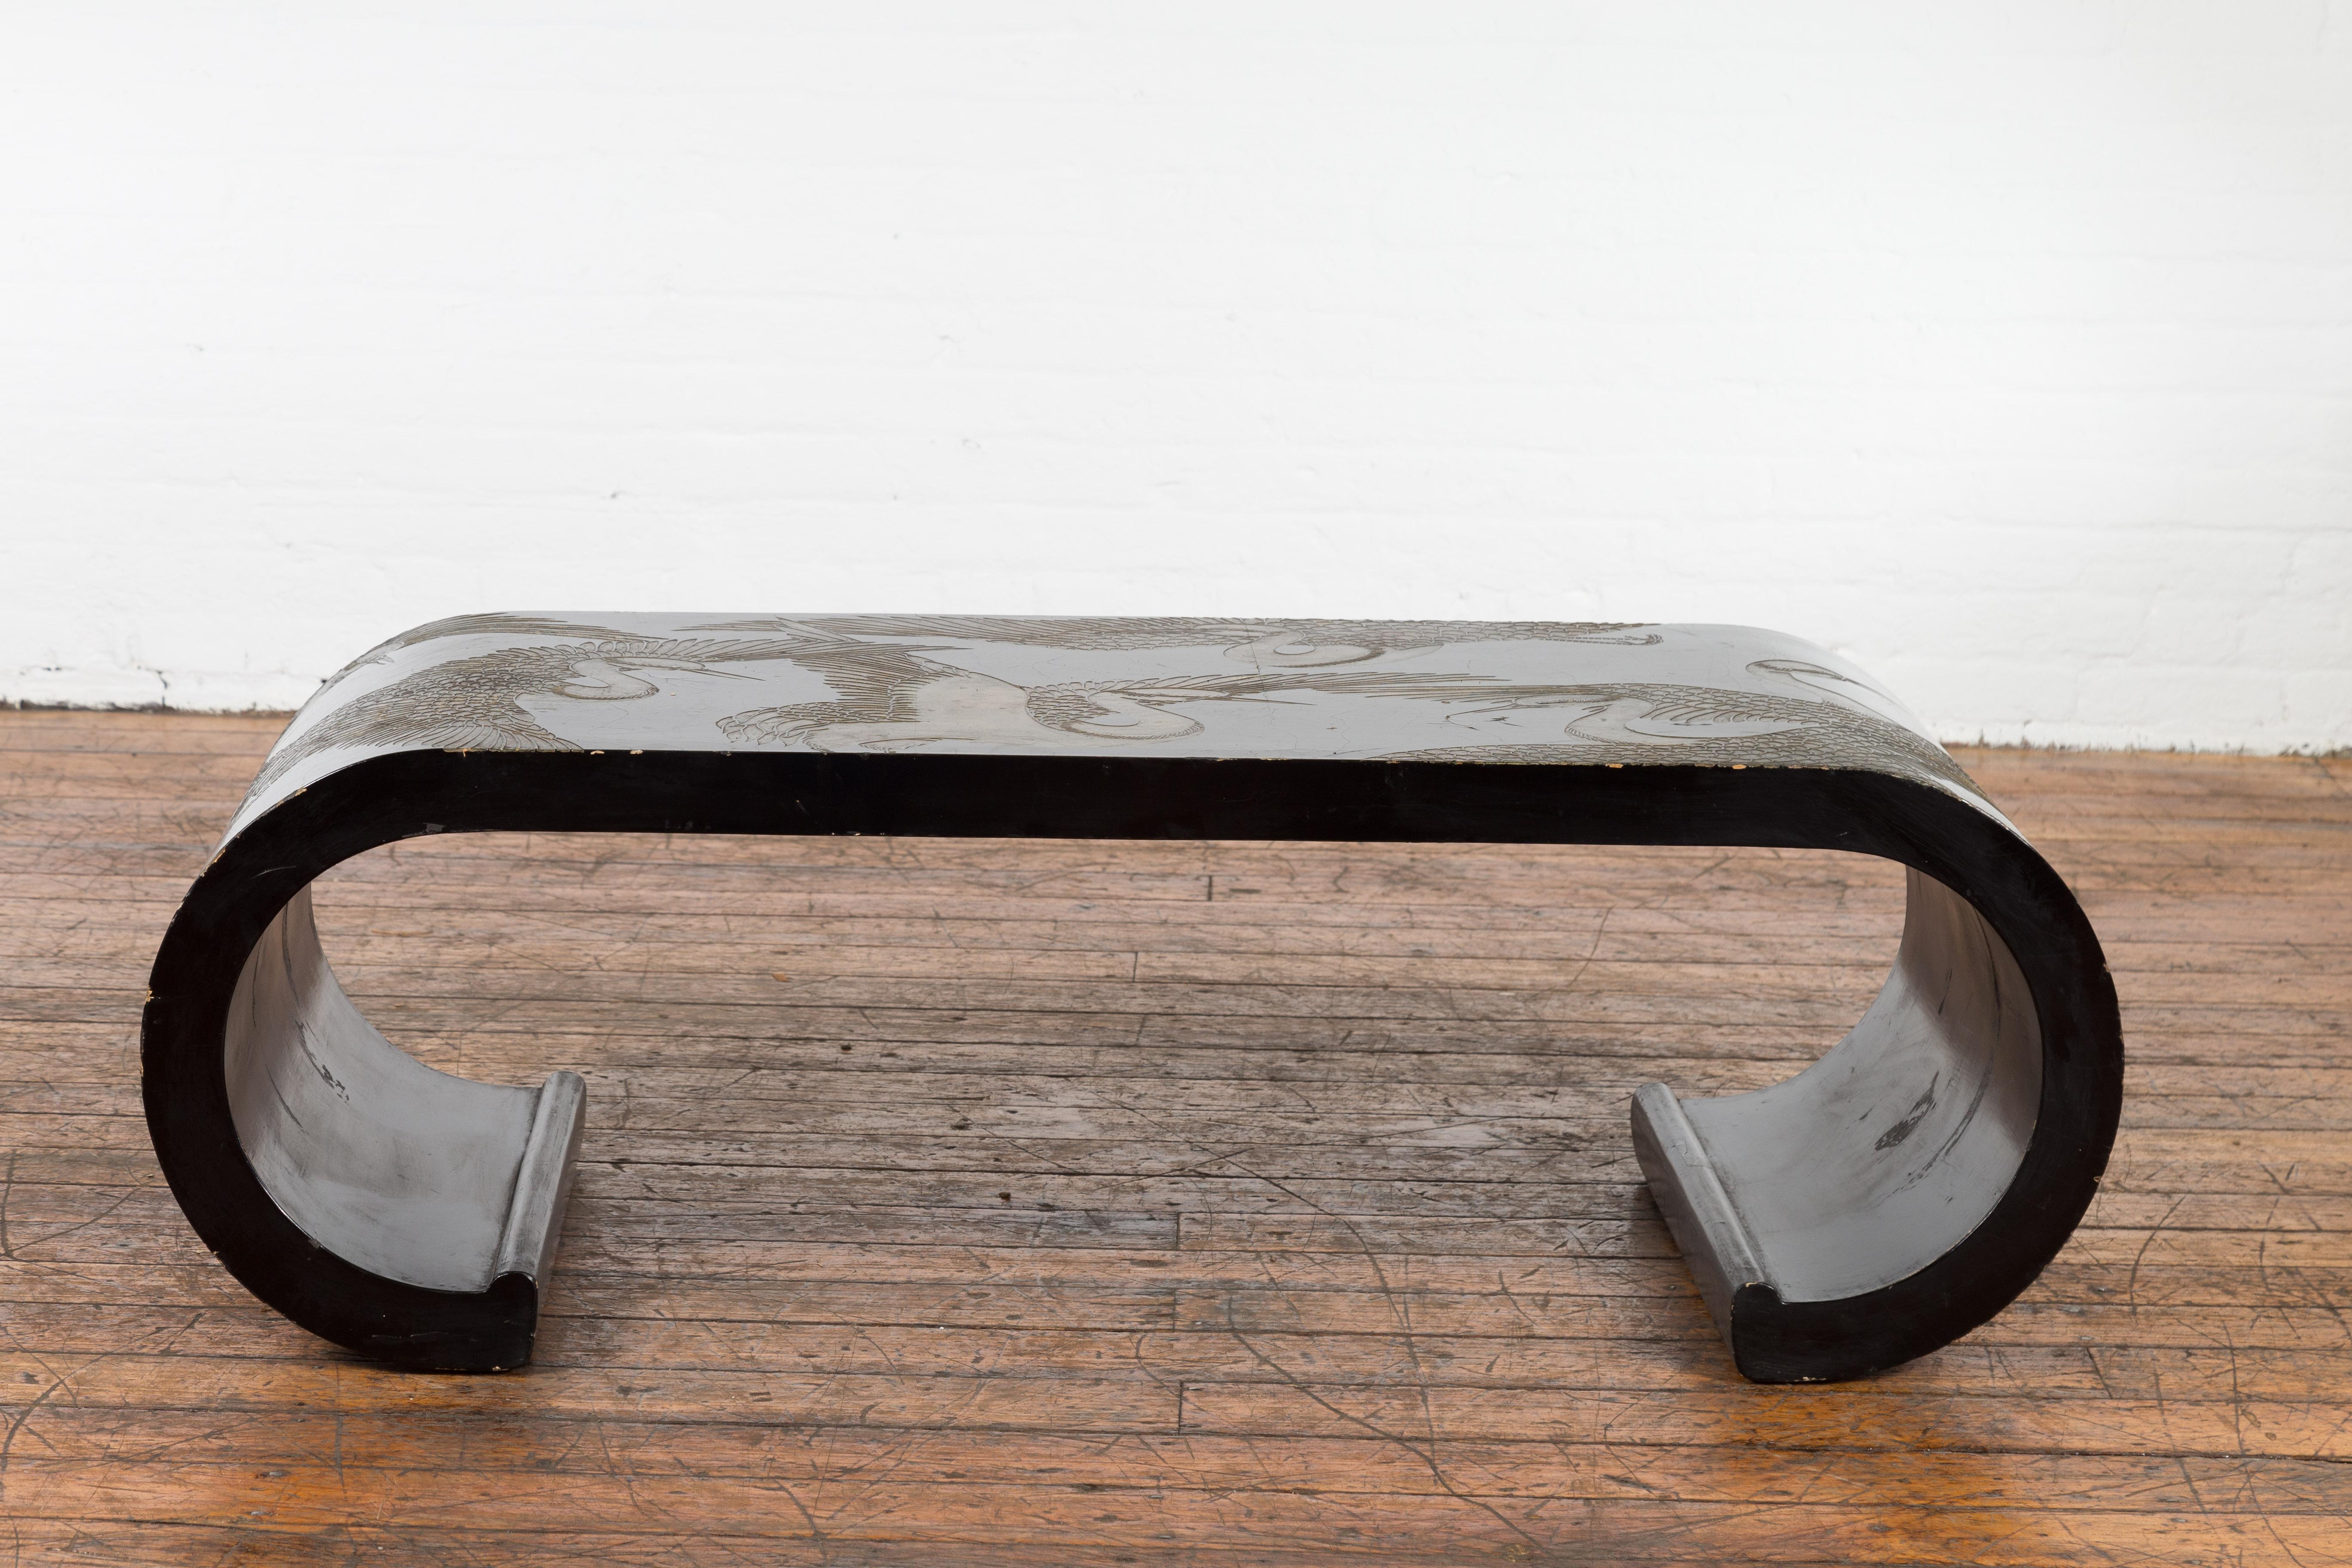 A Chinese vintage waterfall scroll coffee table from the Mid-20th Century, with black lacquer and reserved décor depicting elegant birds. Created in China during the Midcentury period, this vintage waterfall coffee table attracts our attention with